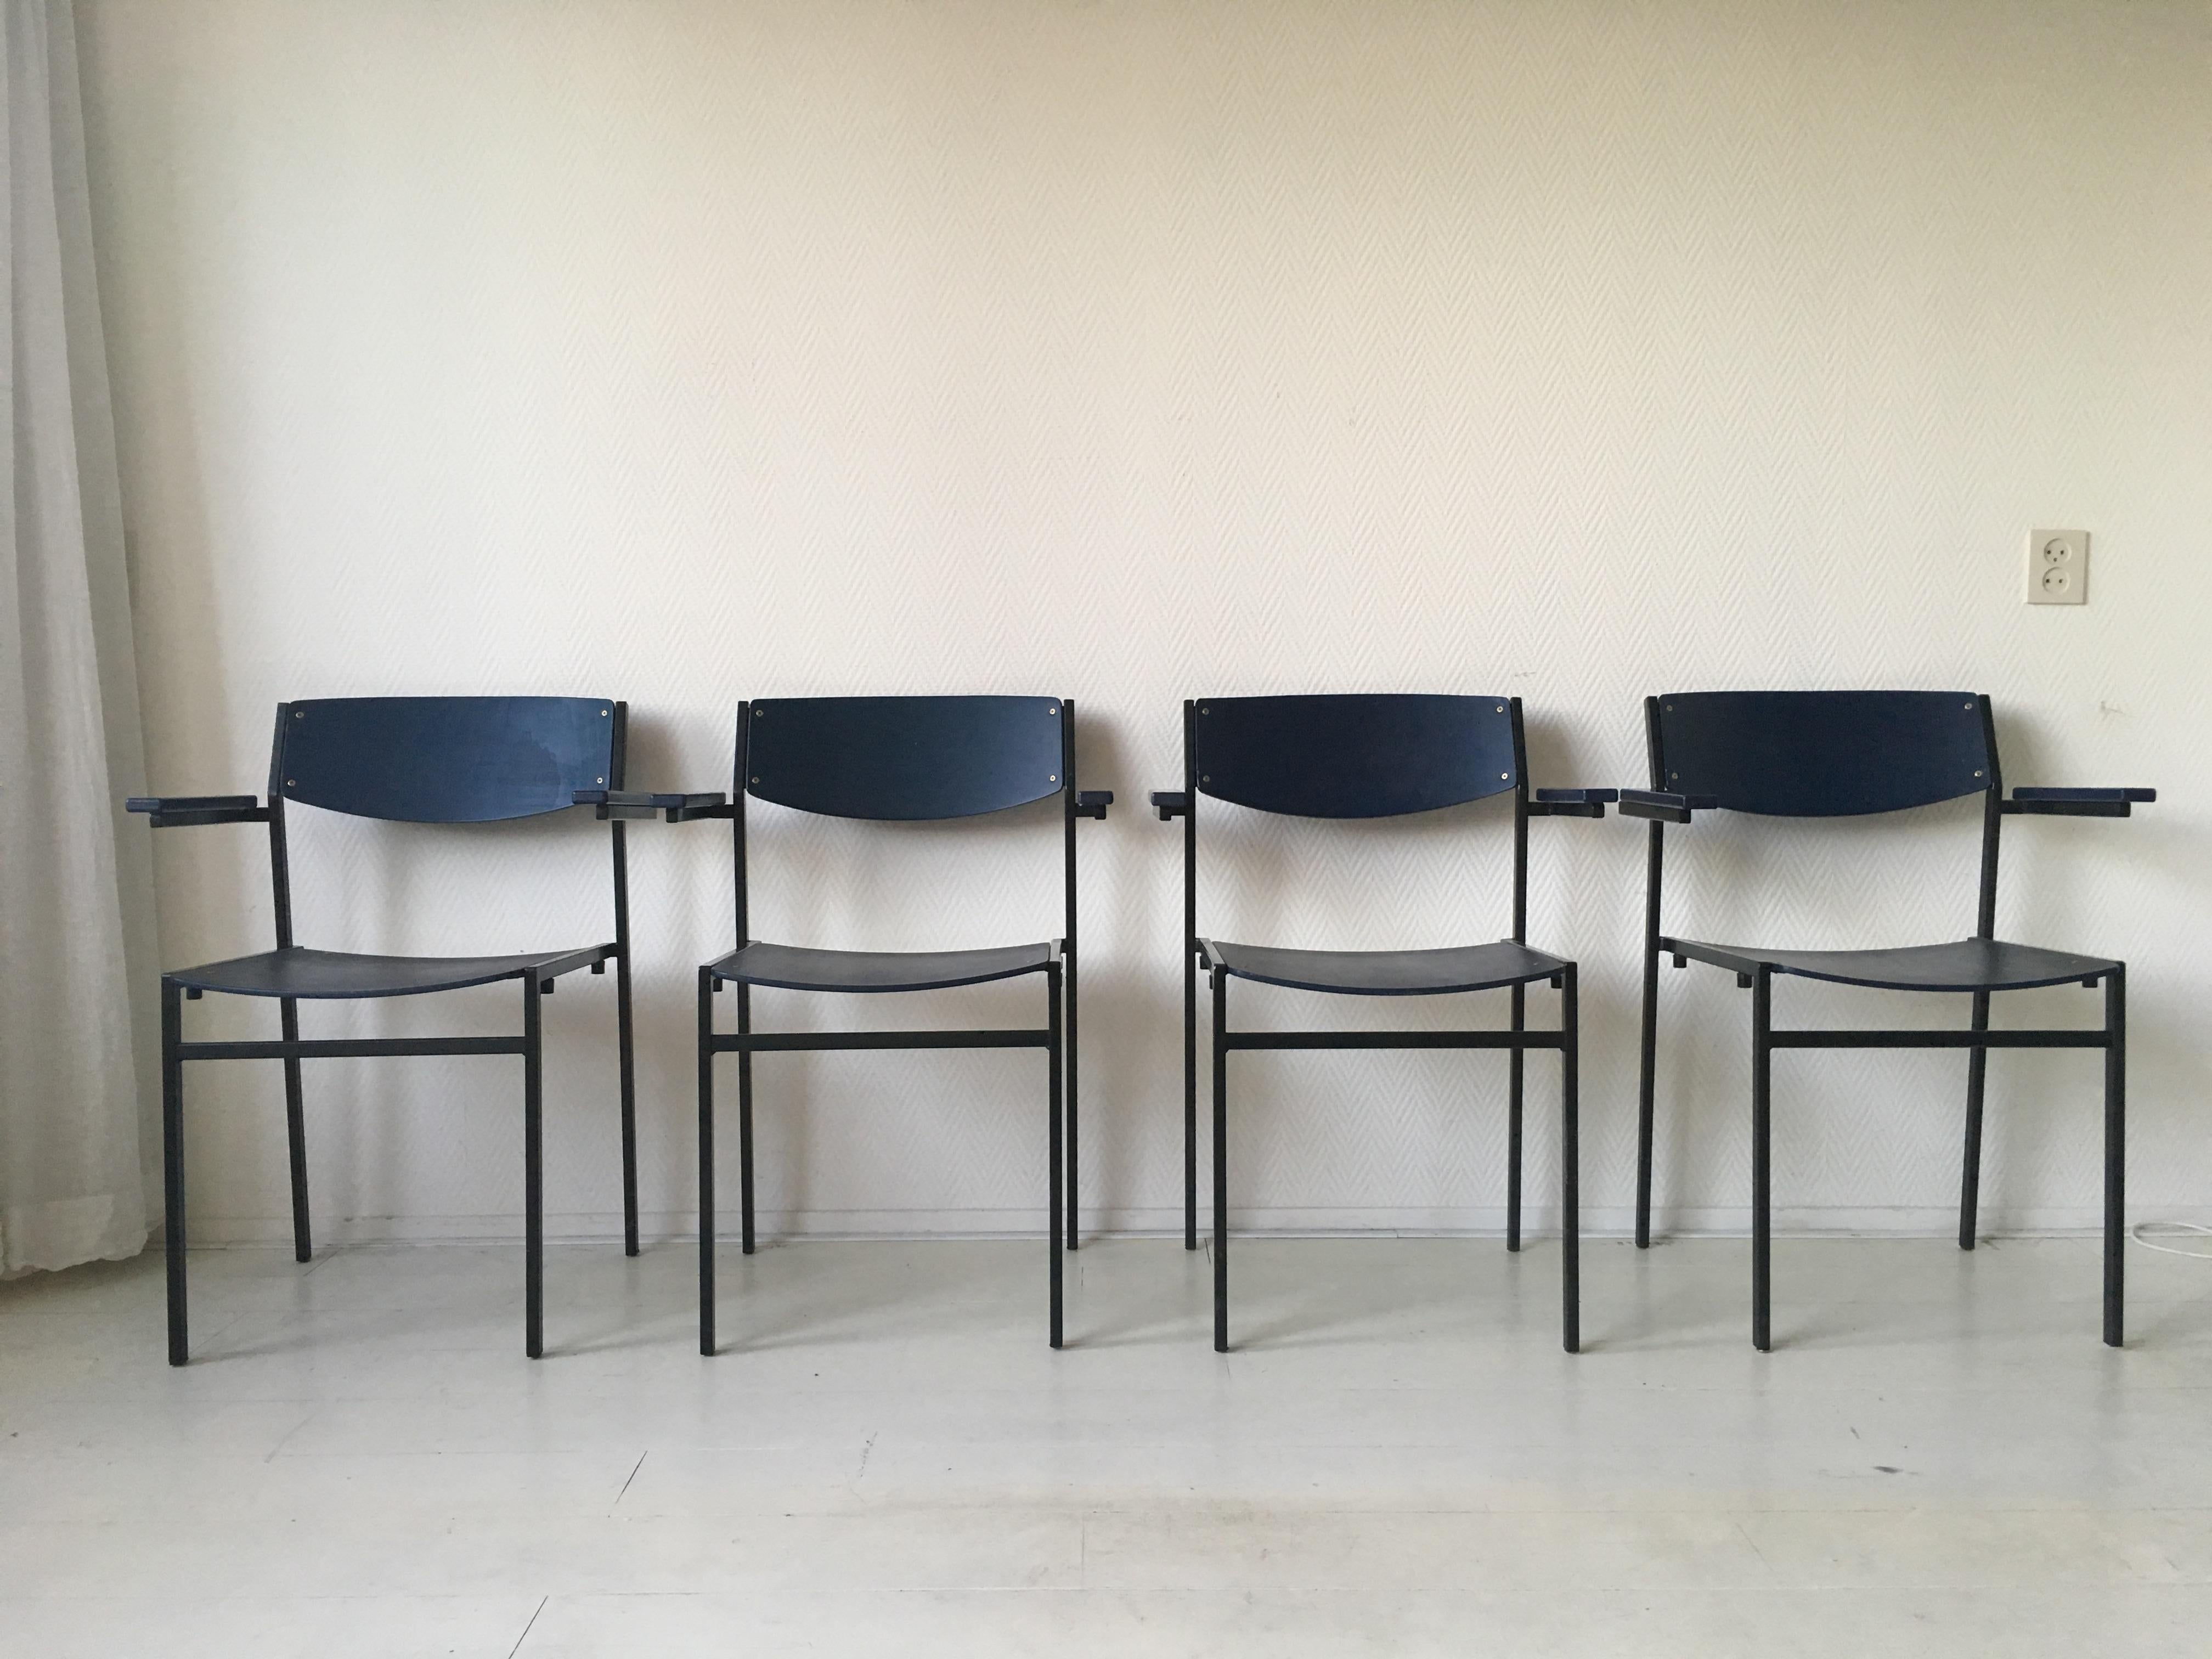 This set of four Dutch design stackable armchairs were designed by Gijs Van Der Sluis. They feature a black lacquered metal base and dark Blue seatings and backs from plywood. Multifunctional pieces (School, Office or Dining Room chairs) which